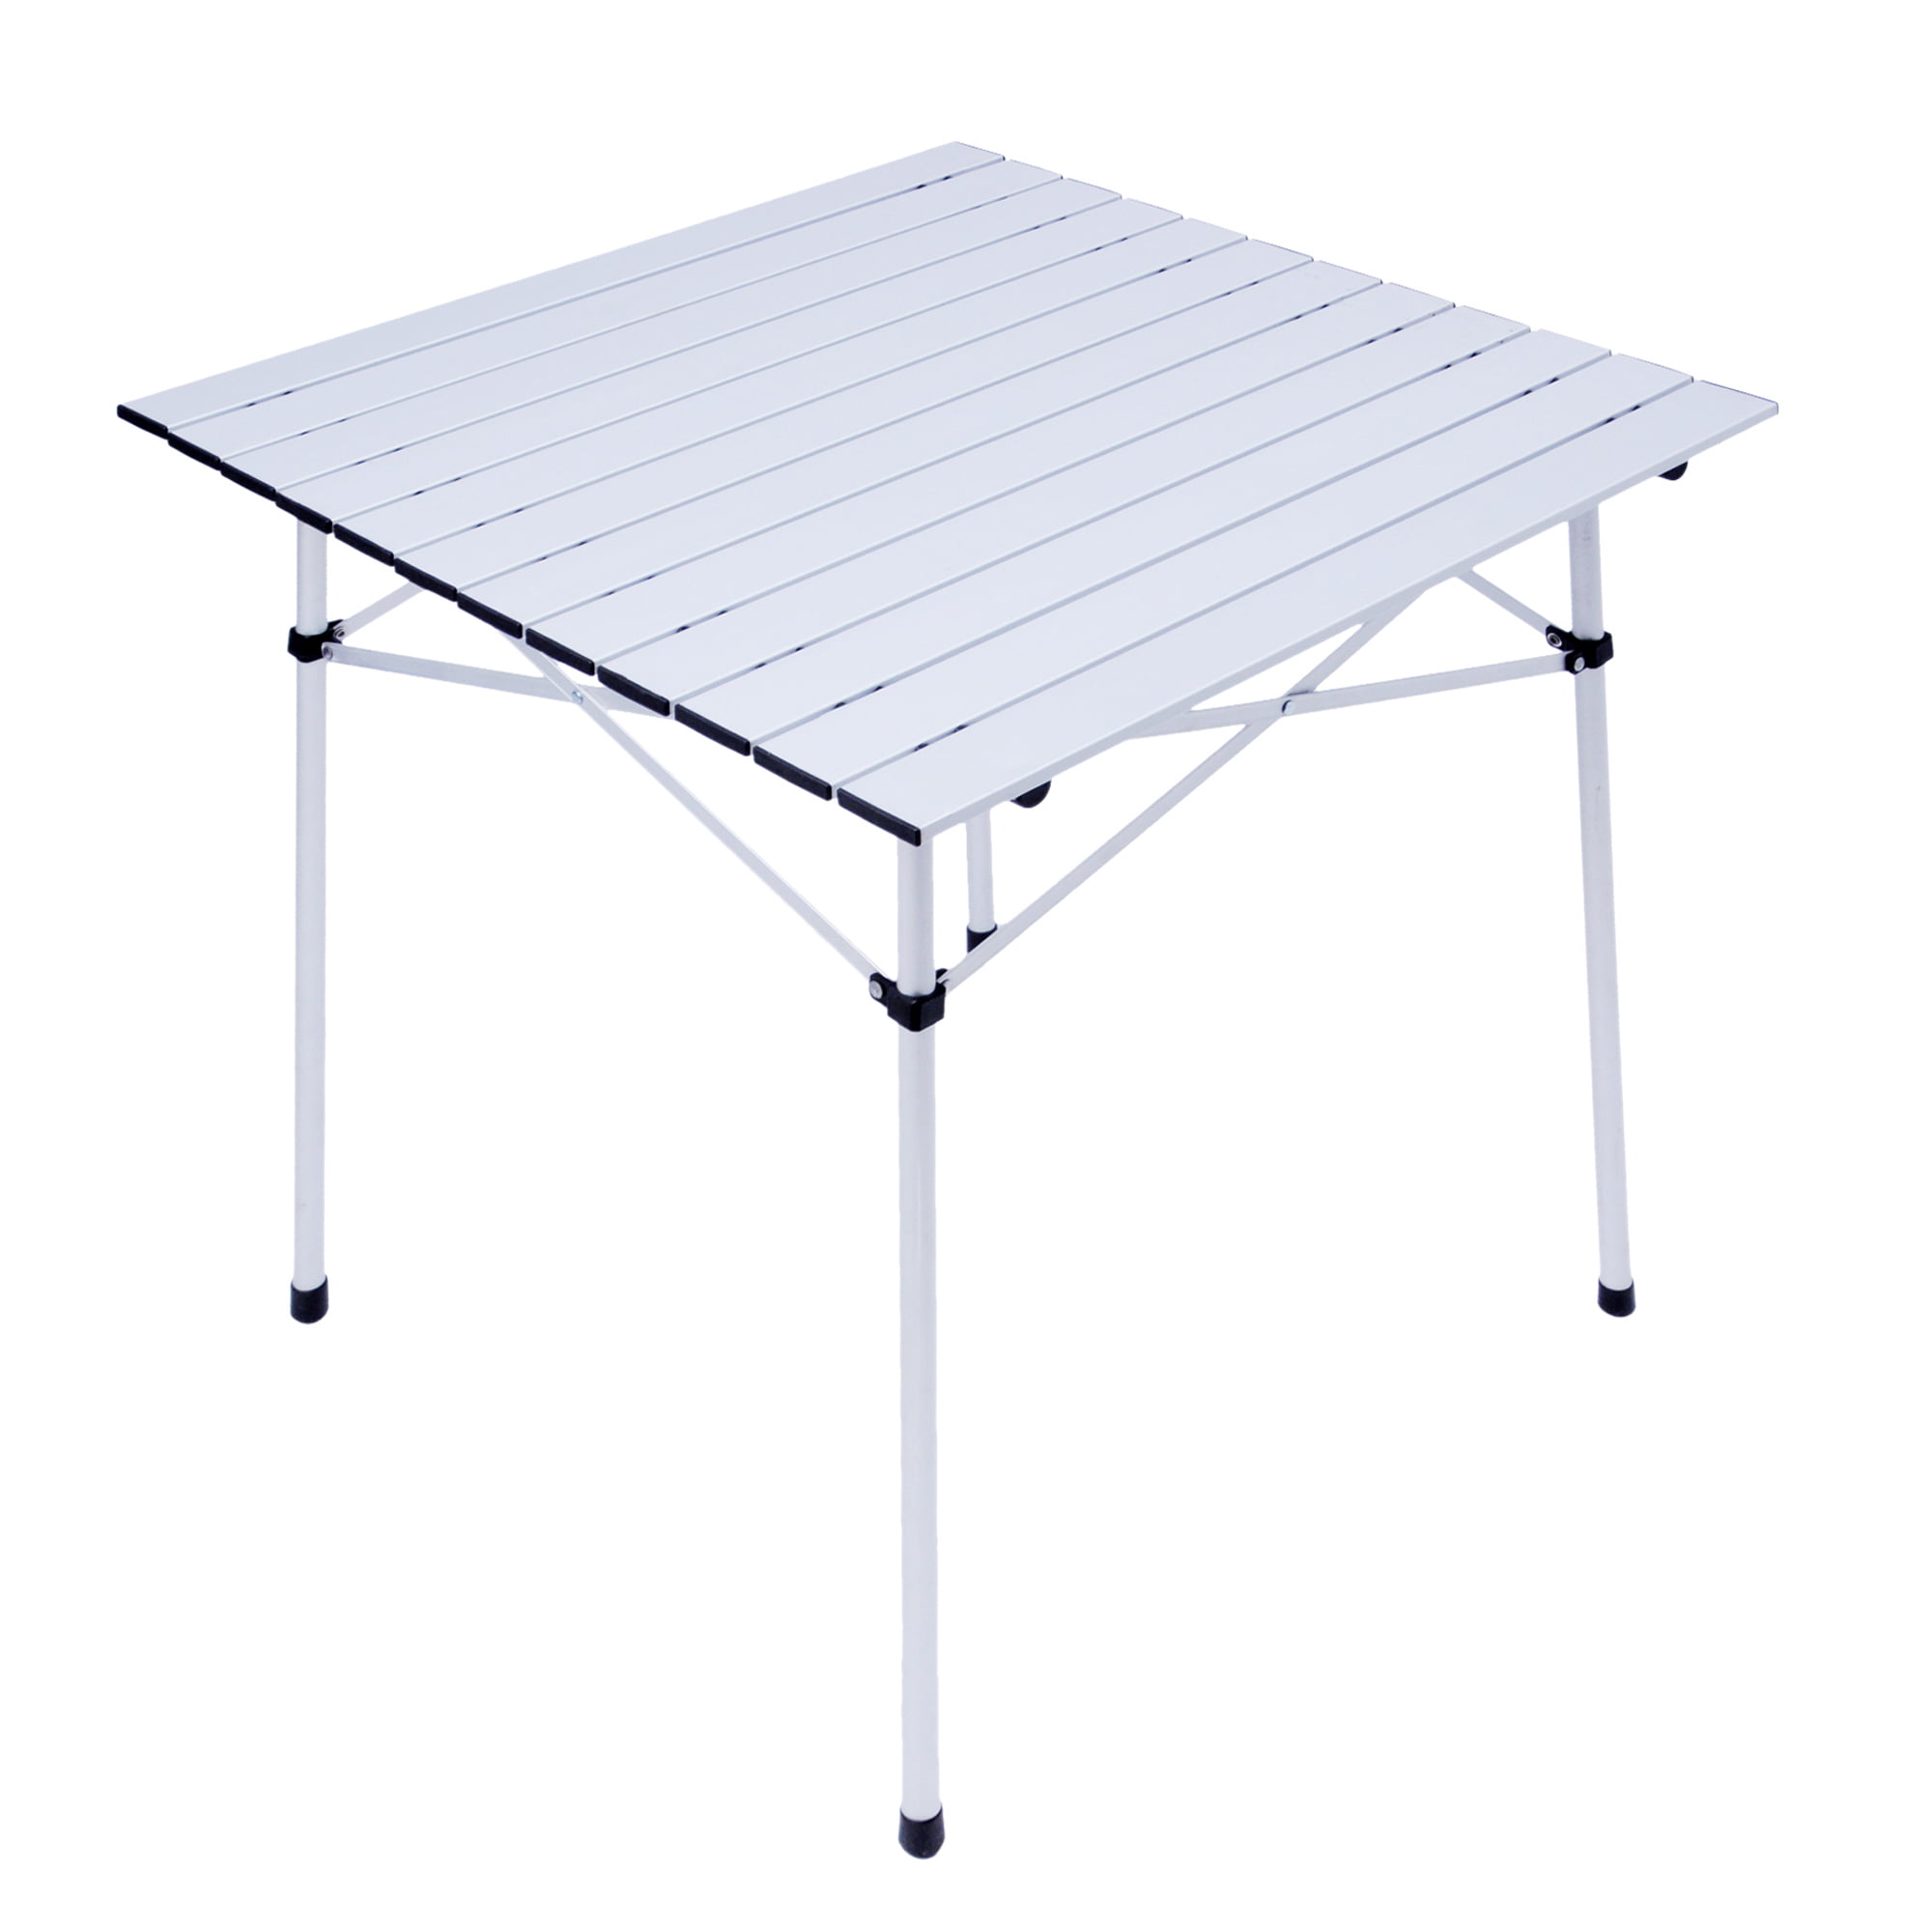 Portable Camp Table,Beach Table,Camping Tables That Fold up Lightweight,with a Storage Bag,for Both Indoor and Outdoor M